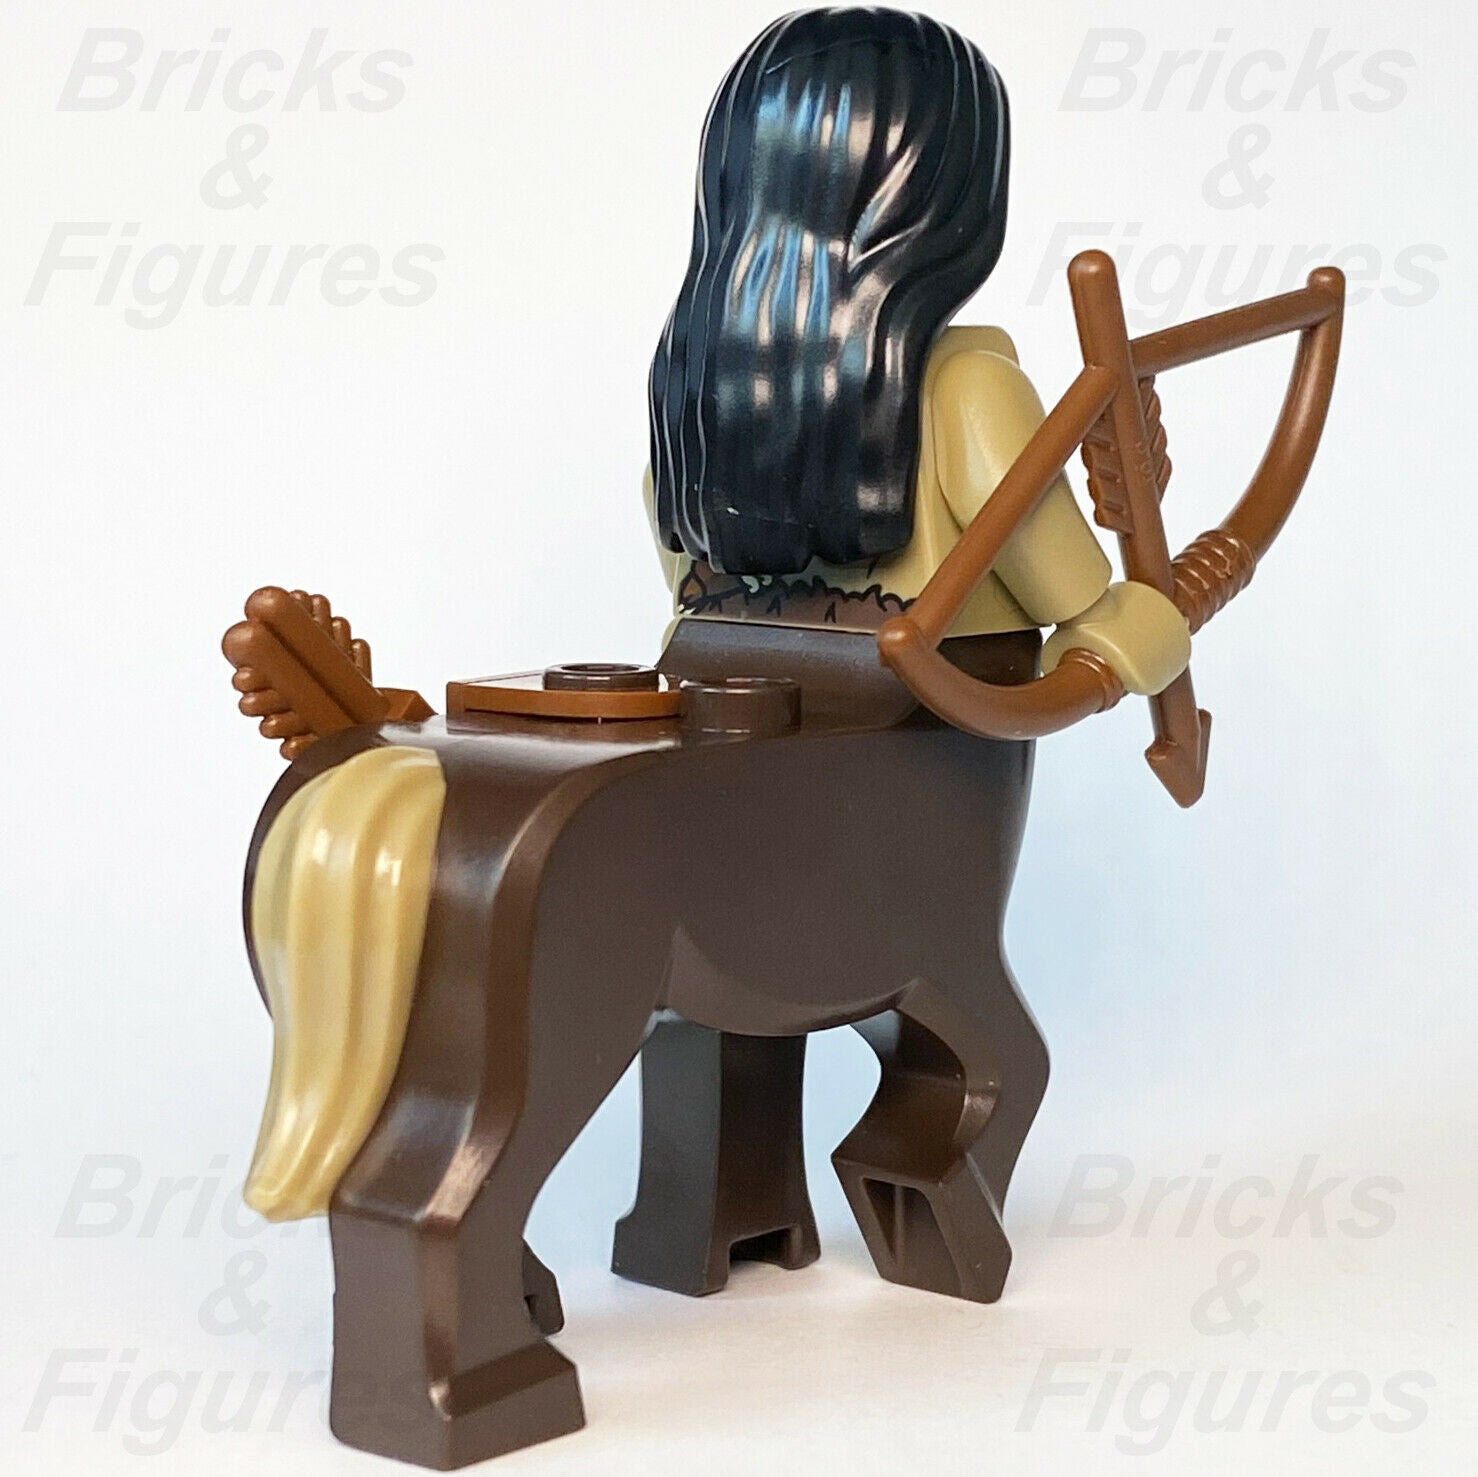 New Harry Potter LEGO Centaur with Bow & Quiver Minifigure from set 75967 - Bricks & Figures